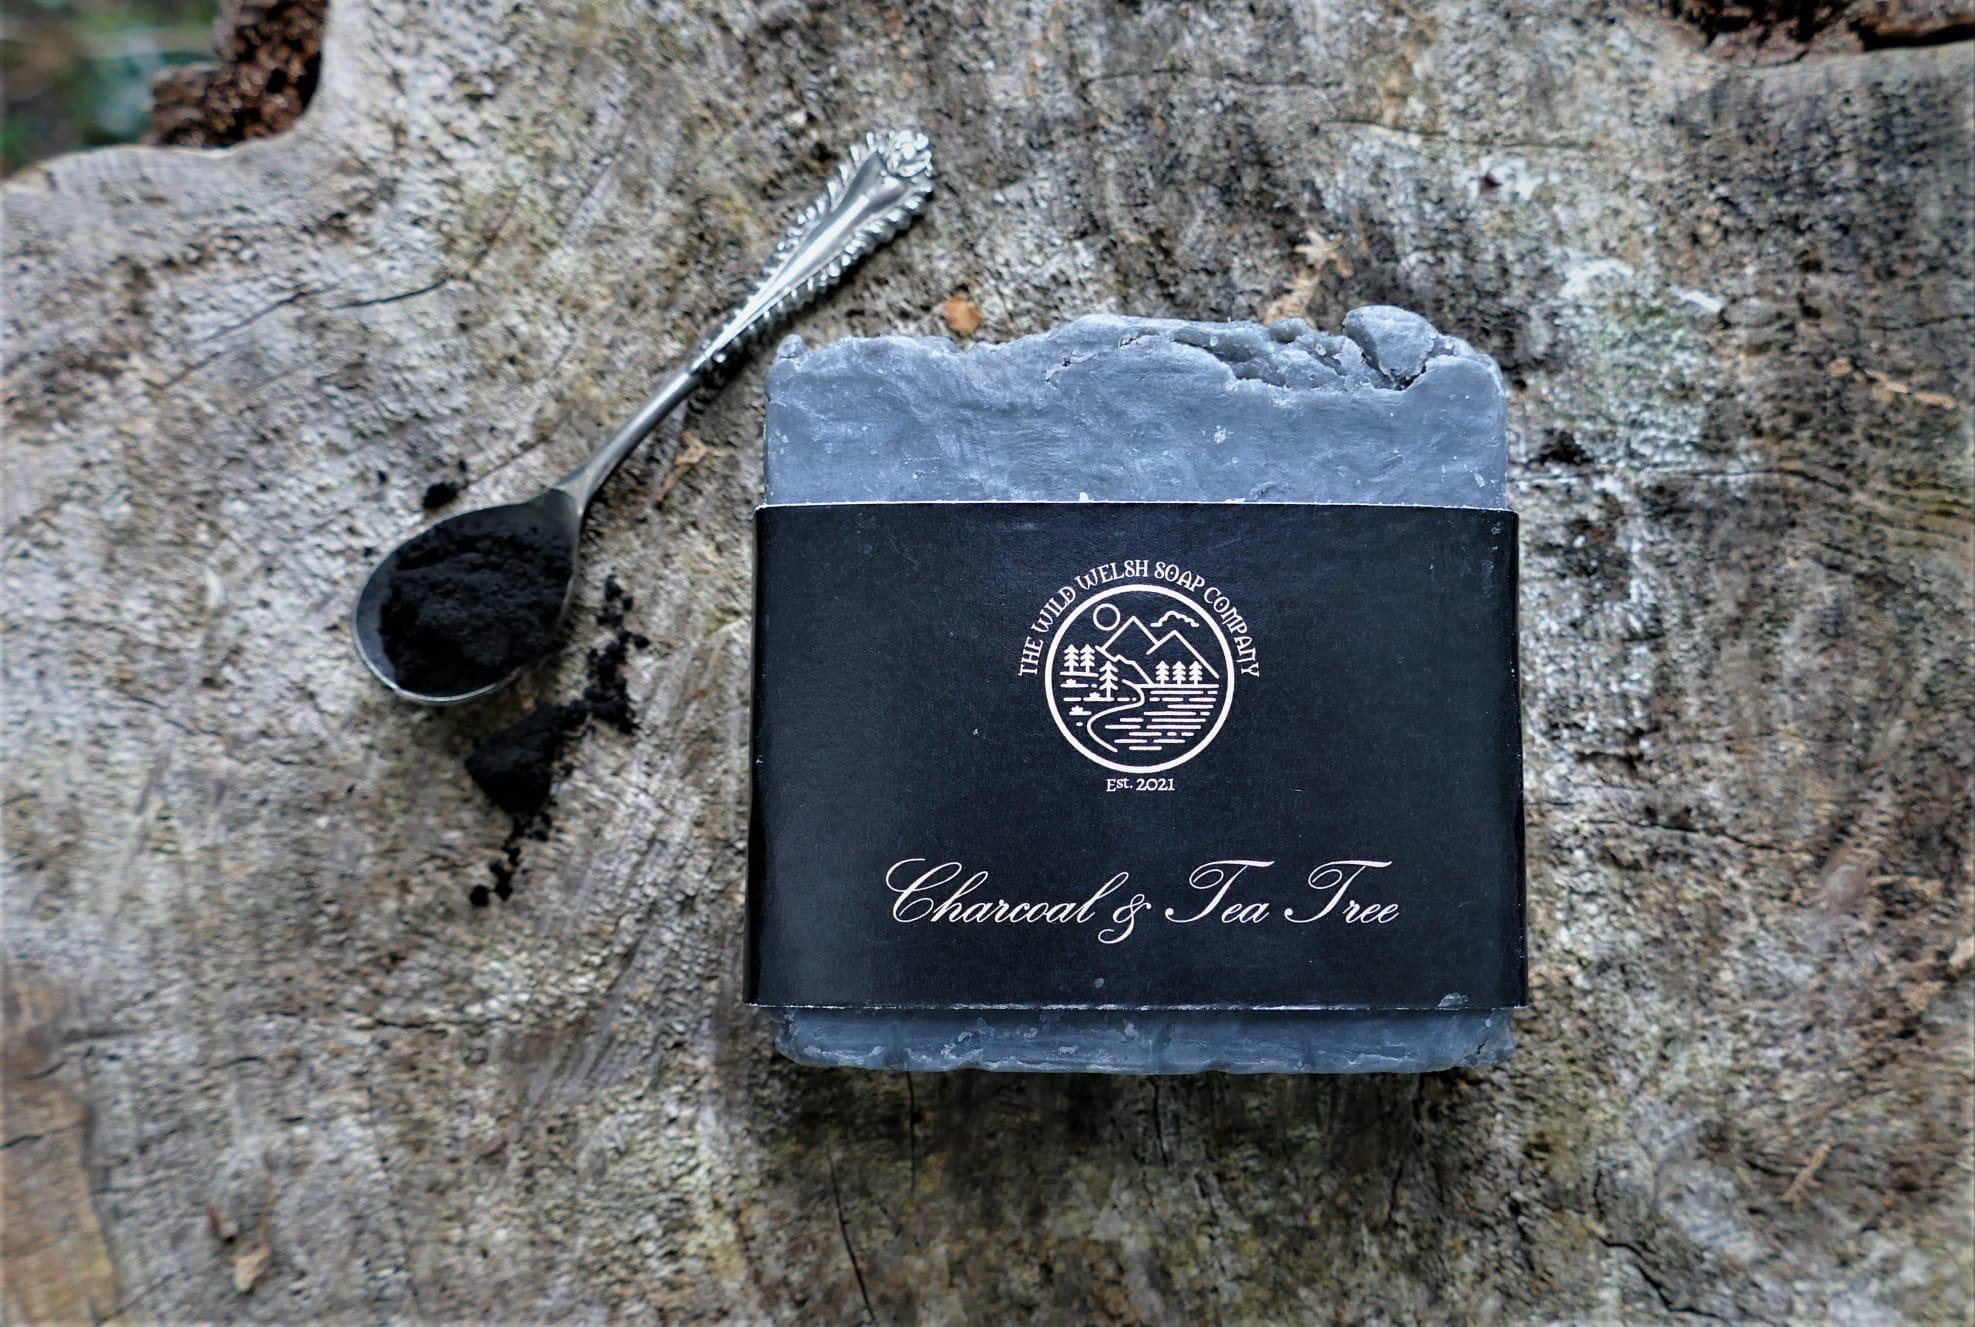 Product Activated Charcoal & Tea Tree - The Wild Welsh Soap Company Ltd. image